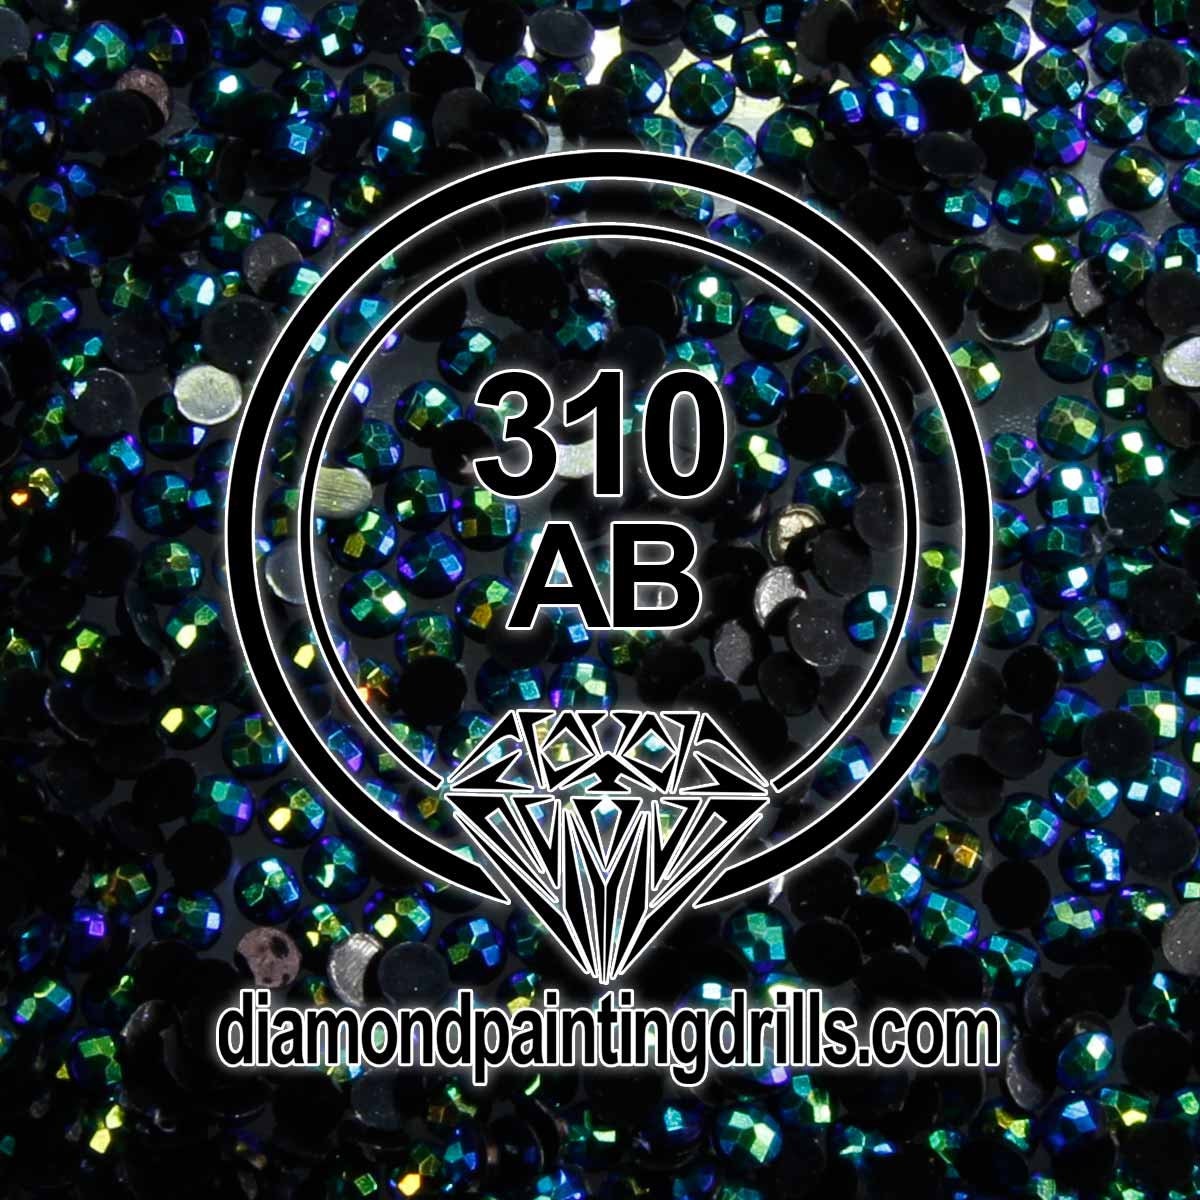 5,000pcs Glow in The Dark Diamond Painting Replacement Beads, Resin Square  Diamonds Missing Drills Accessories for Diamond Art Accessories (White,  Square)